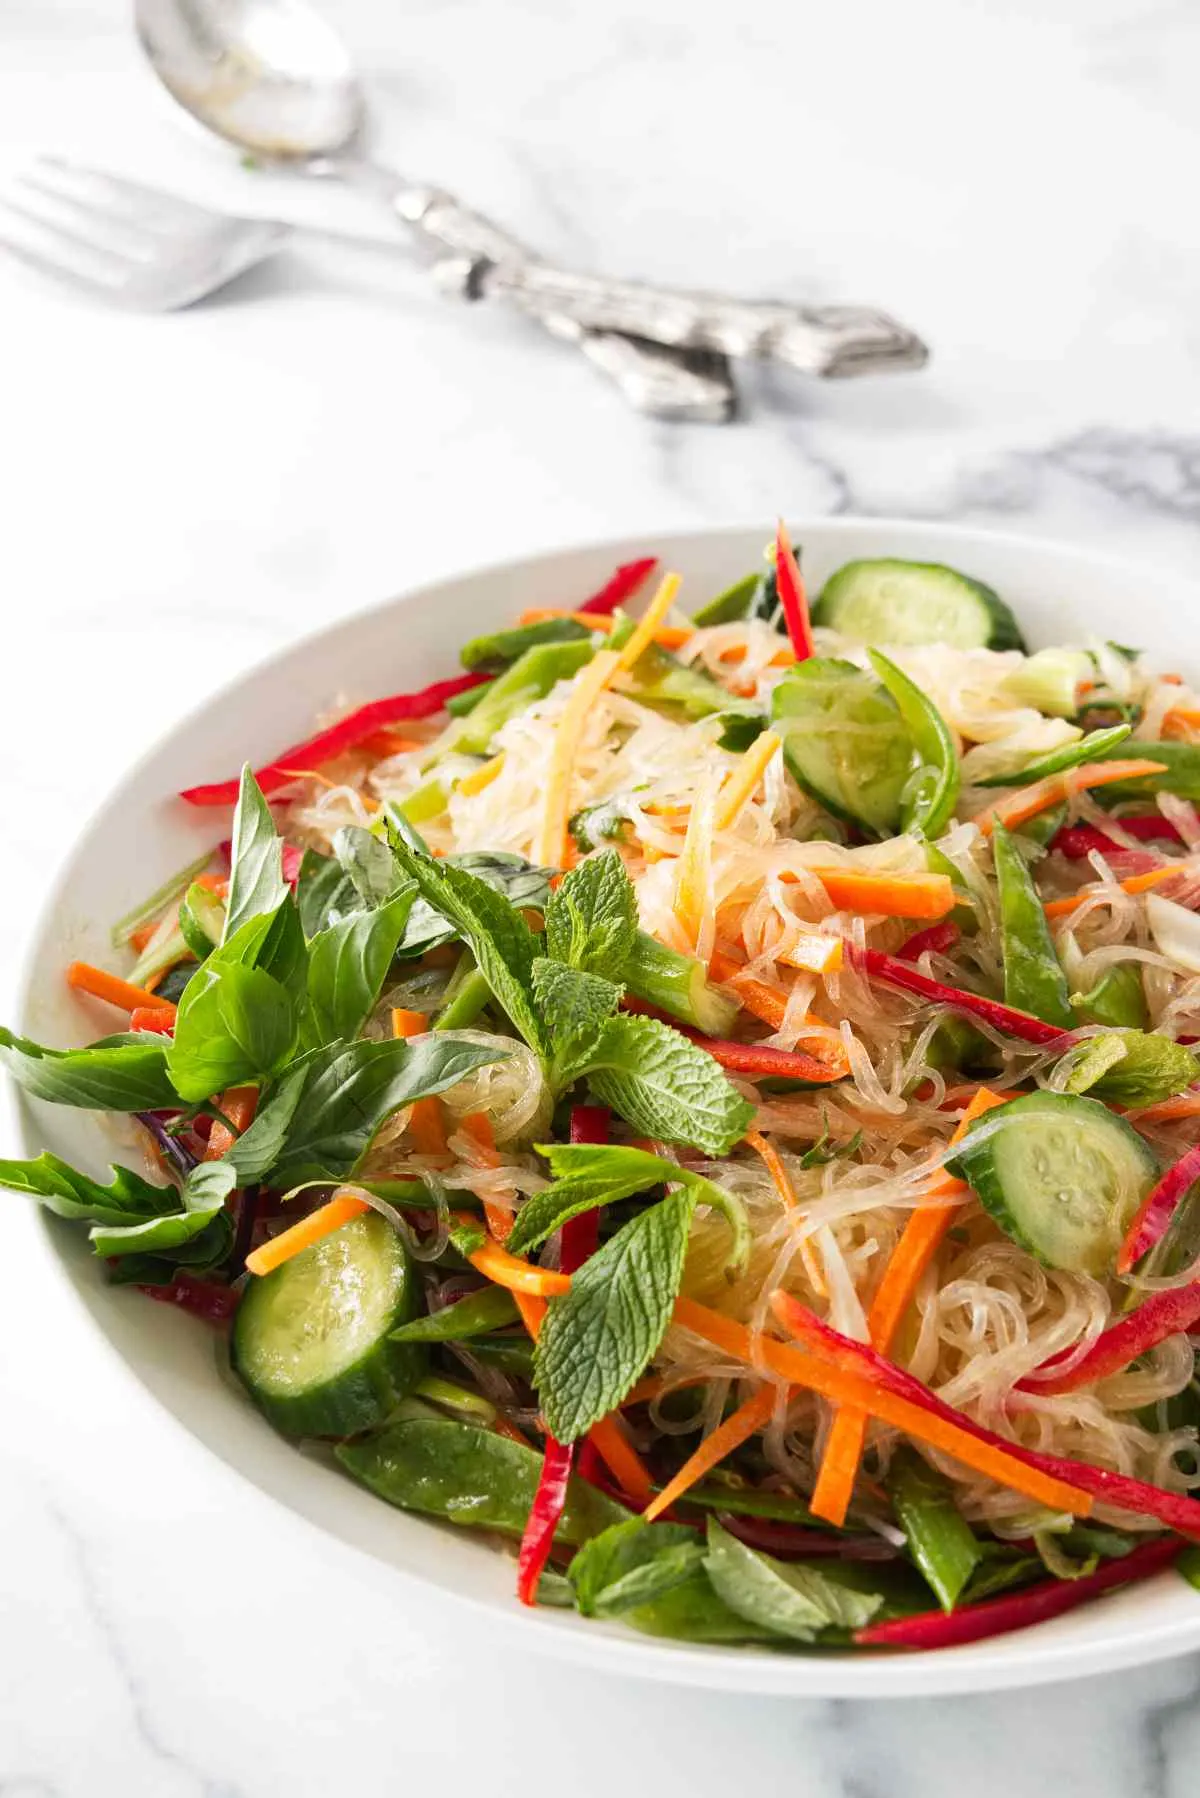 A bowl with tossed glass noodle salad. Salad mixing utensils in the background.